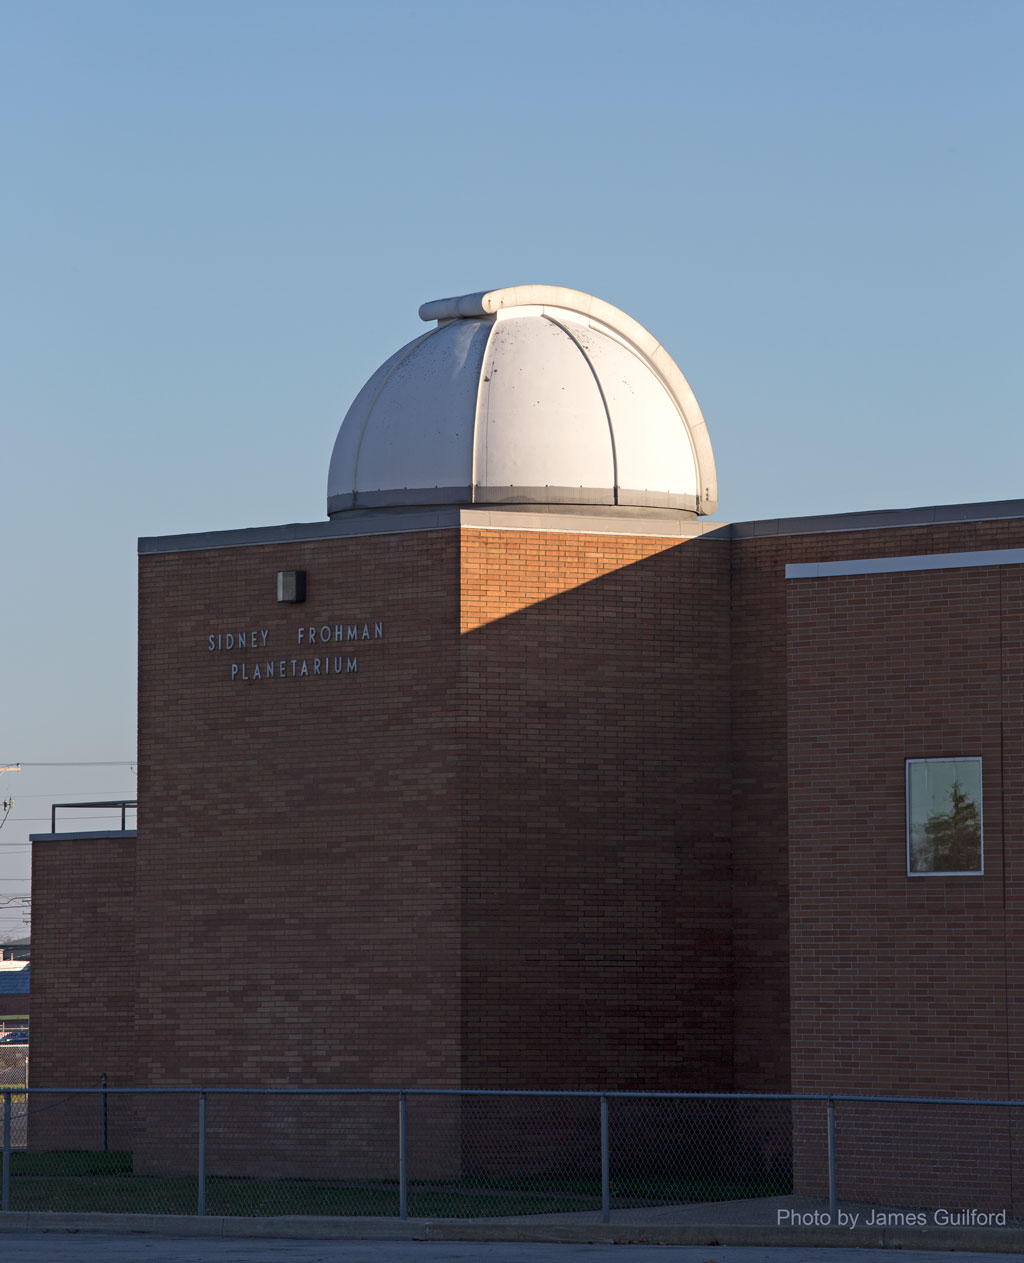 Photo: Observatory Dome at the Sidney Frohman Planetarium. Photo by James Guilford.